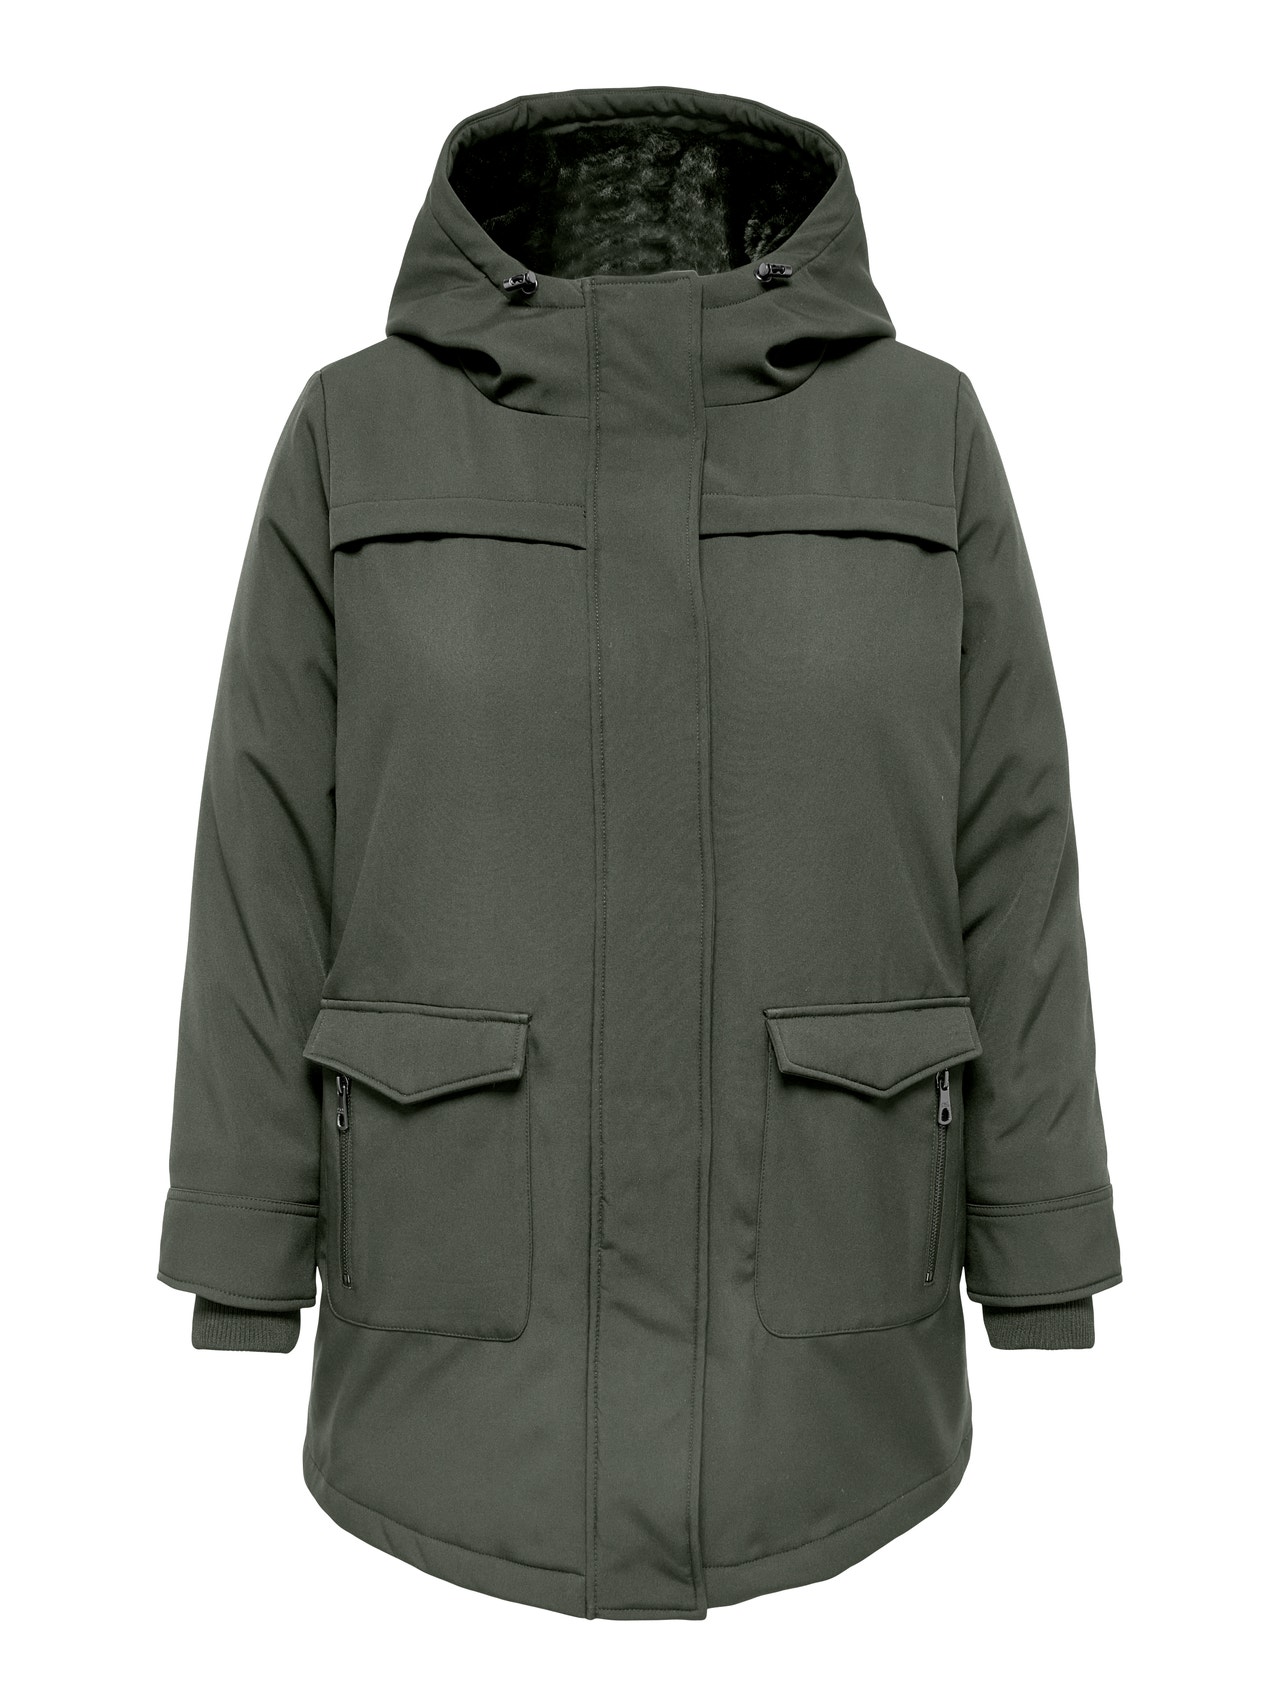 ONLY Curvy Parka -Peat - 15263136